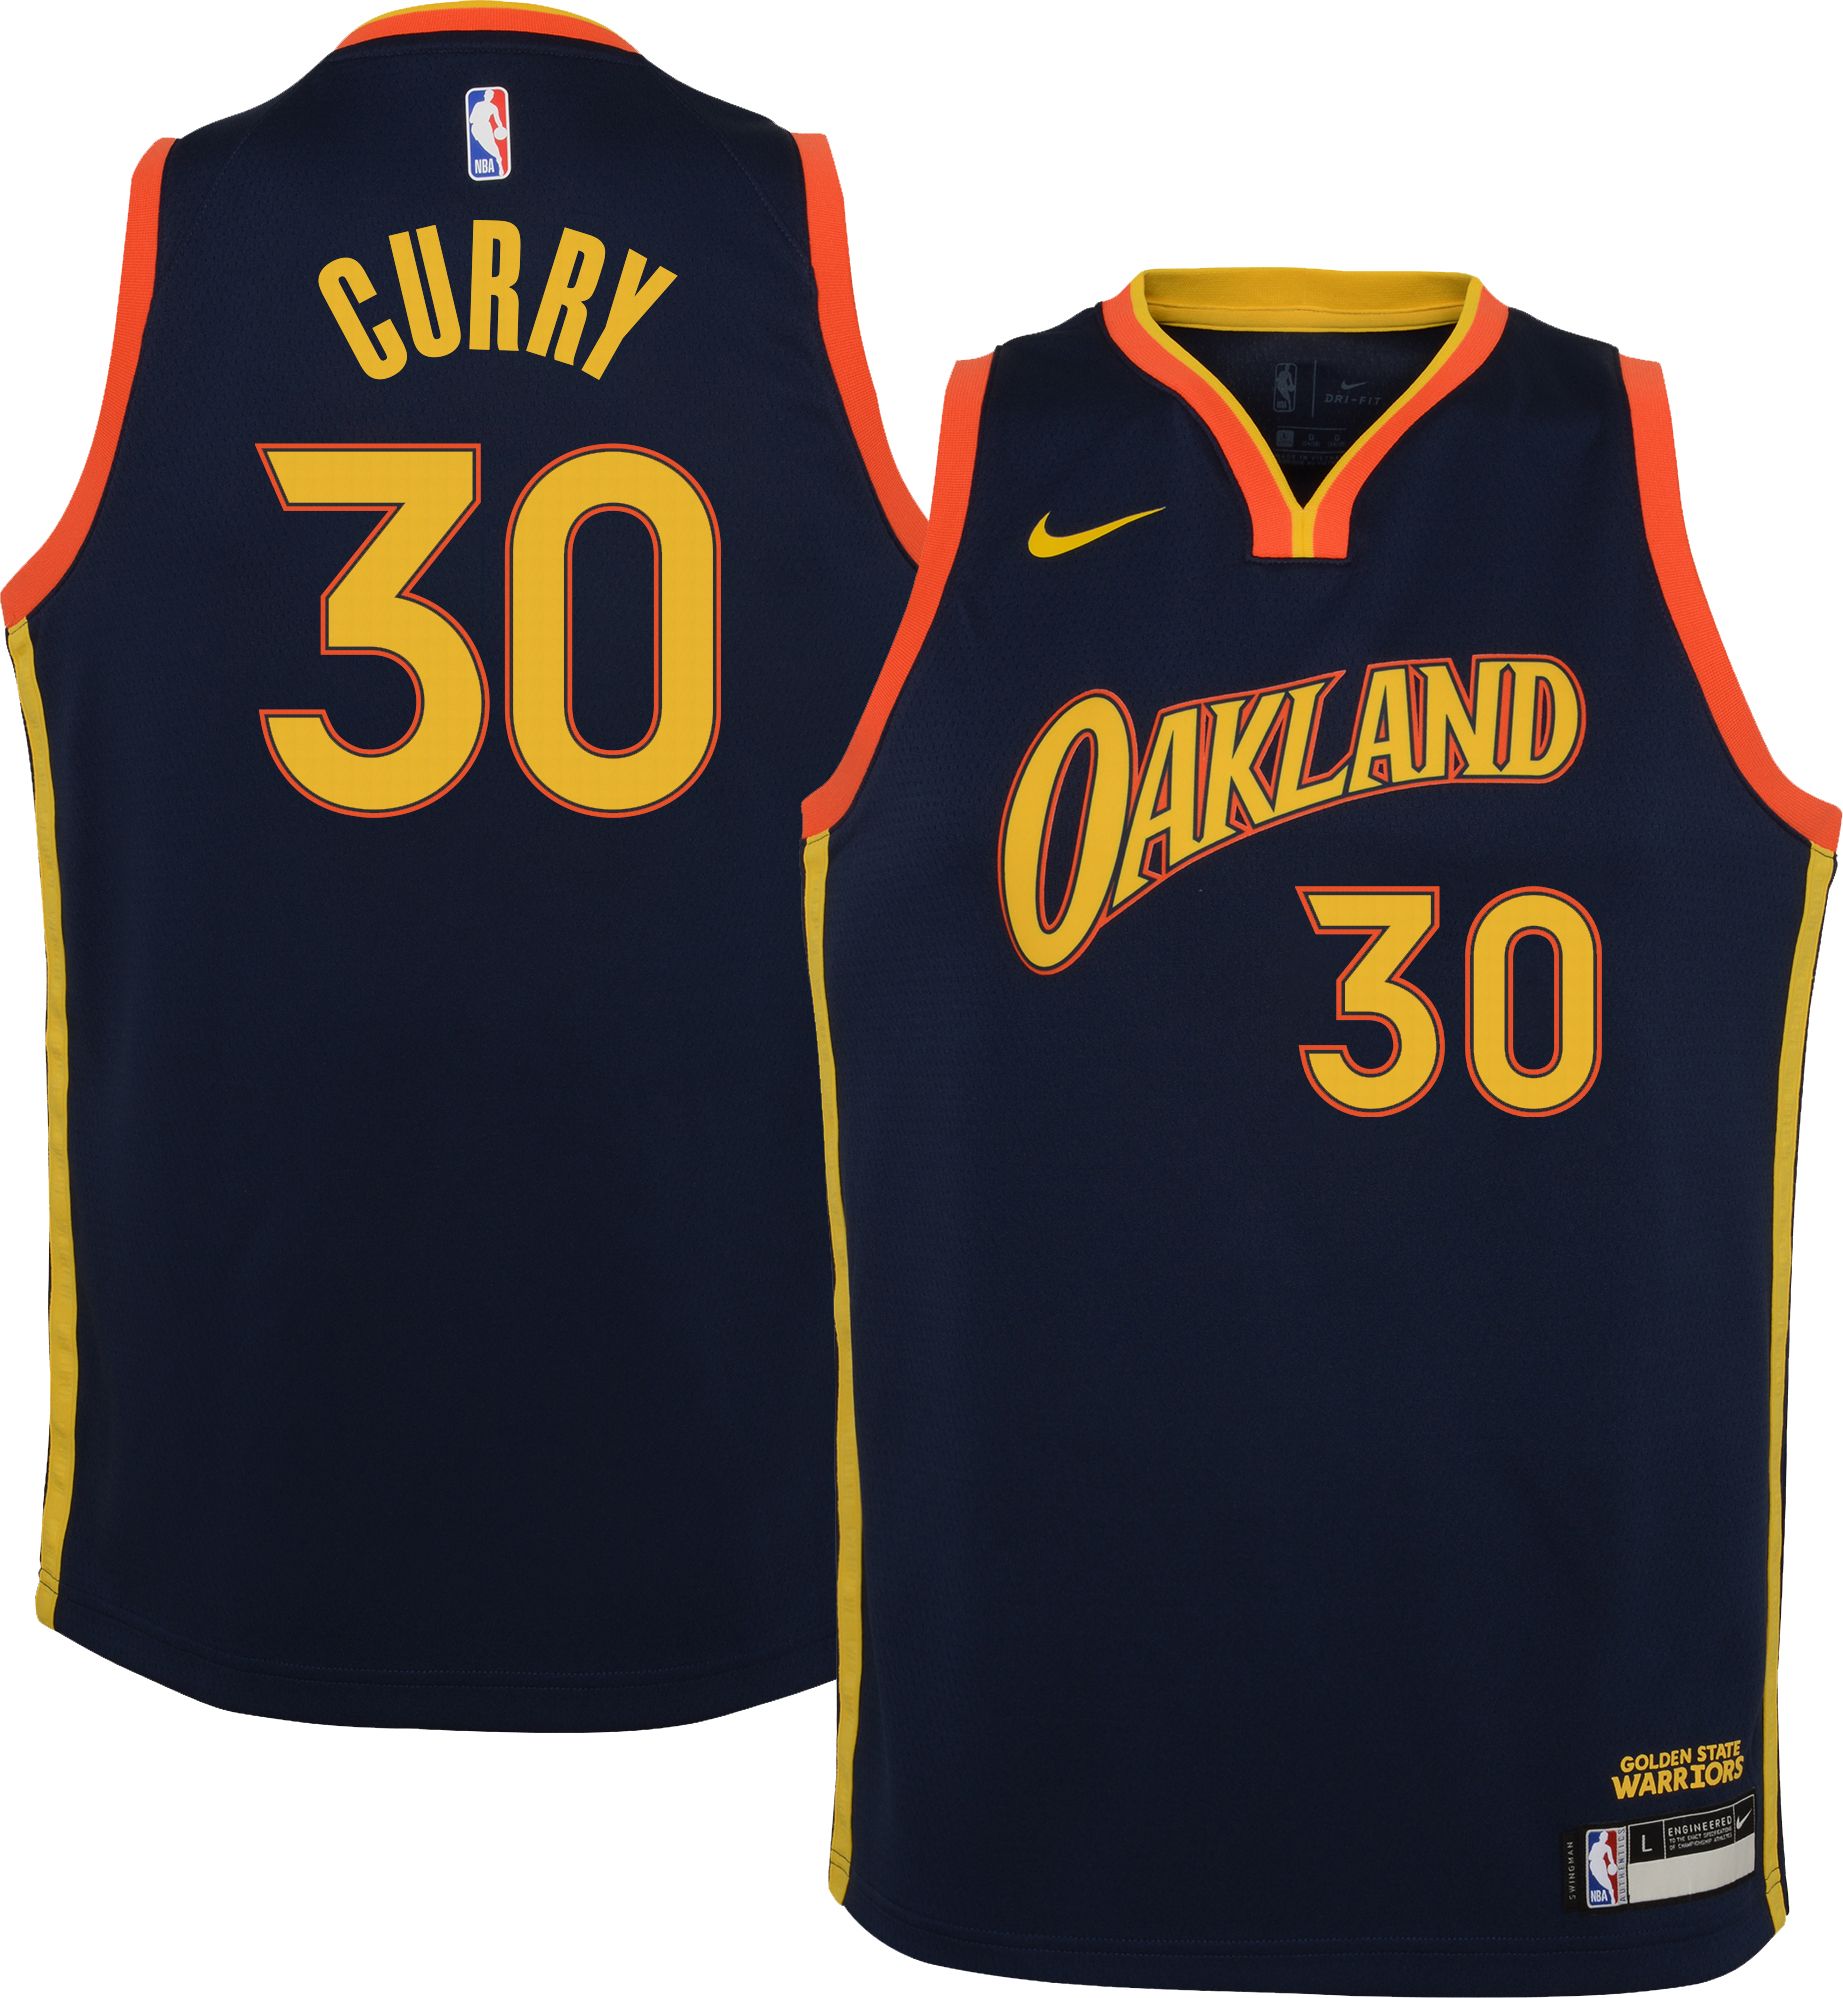 curry jersey youth